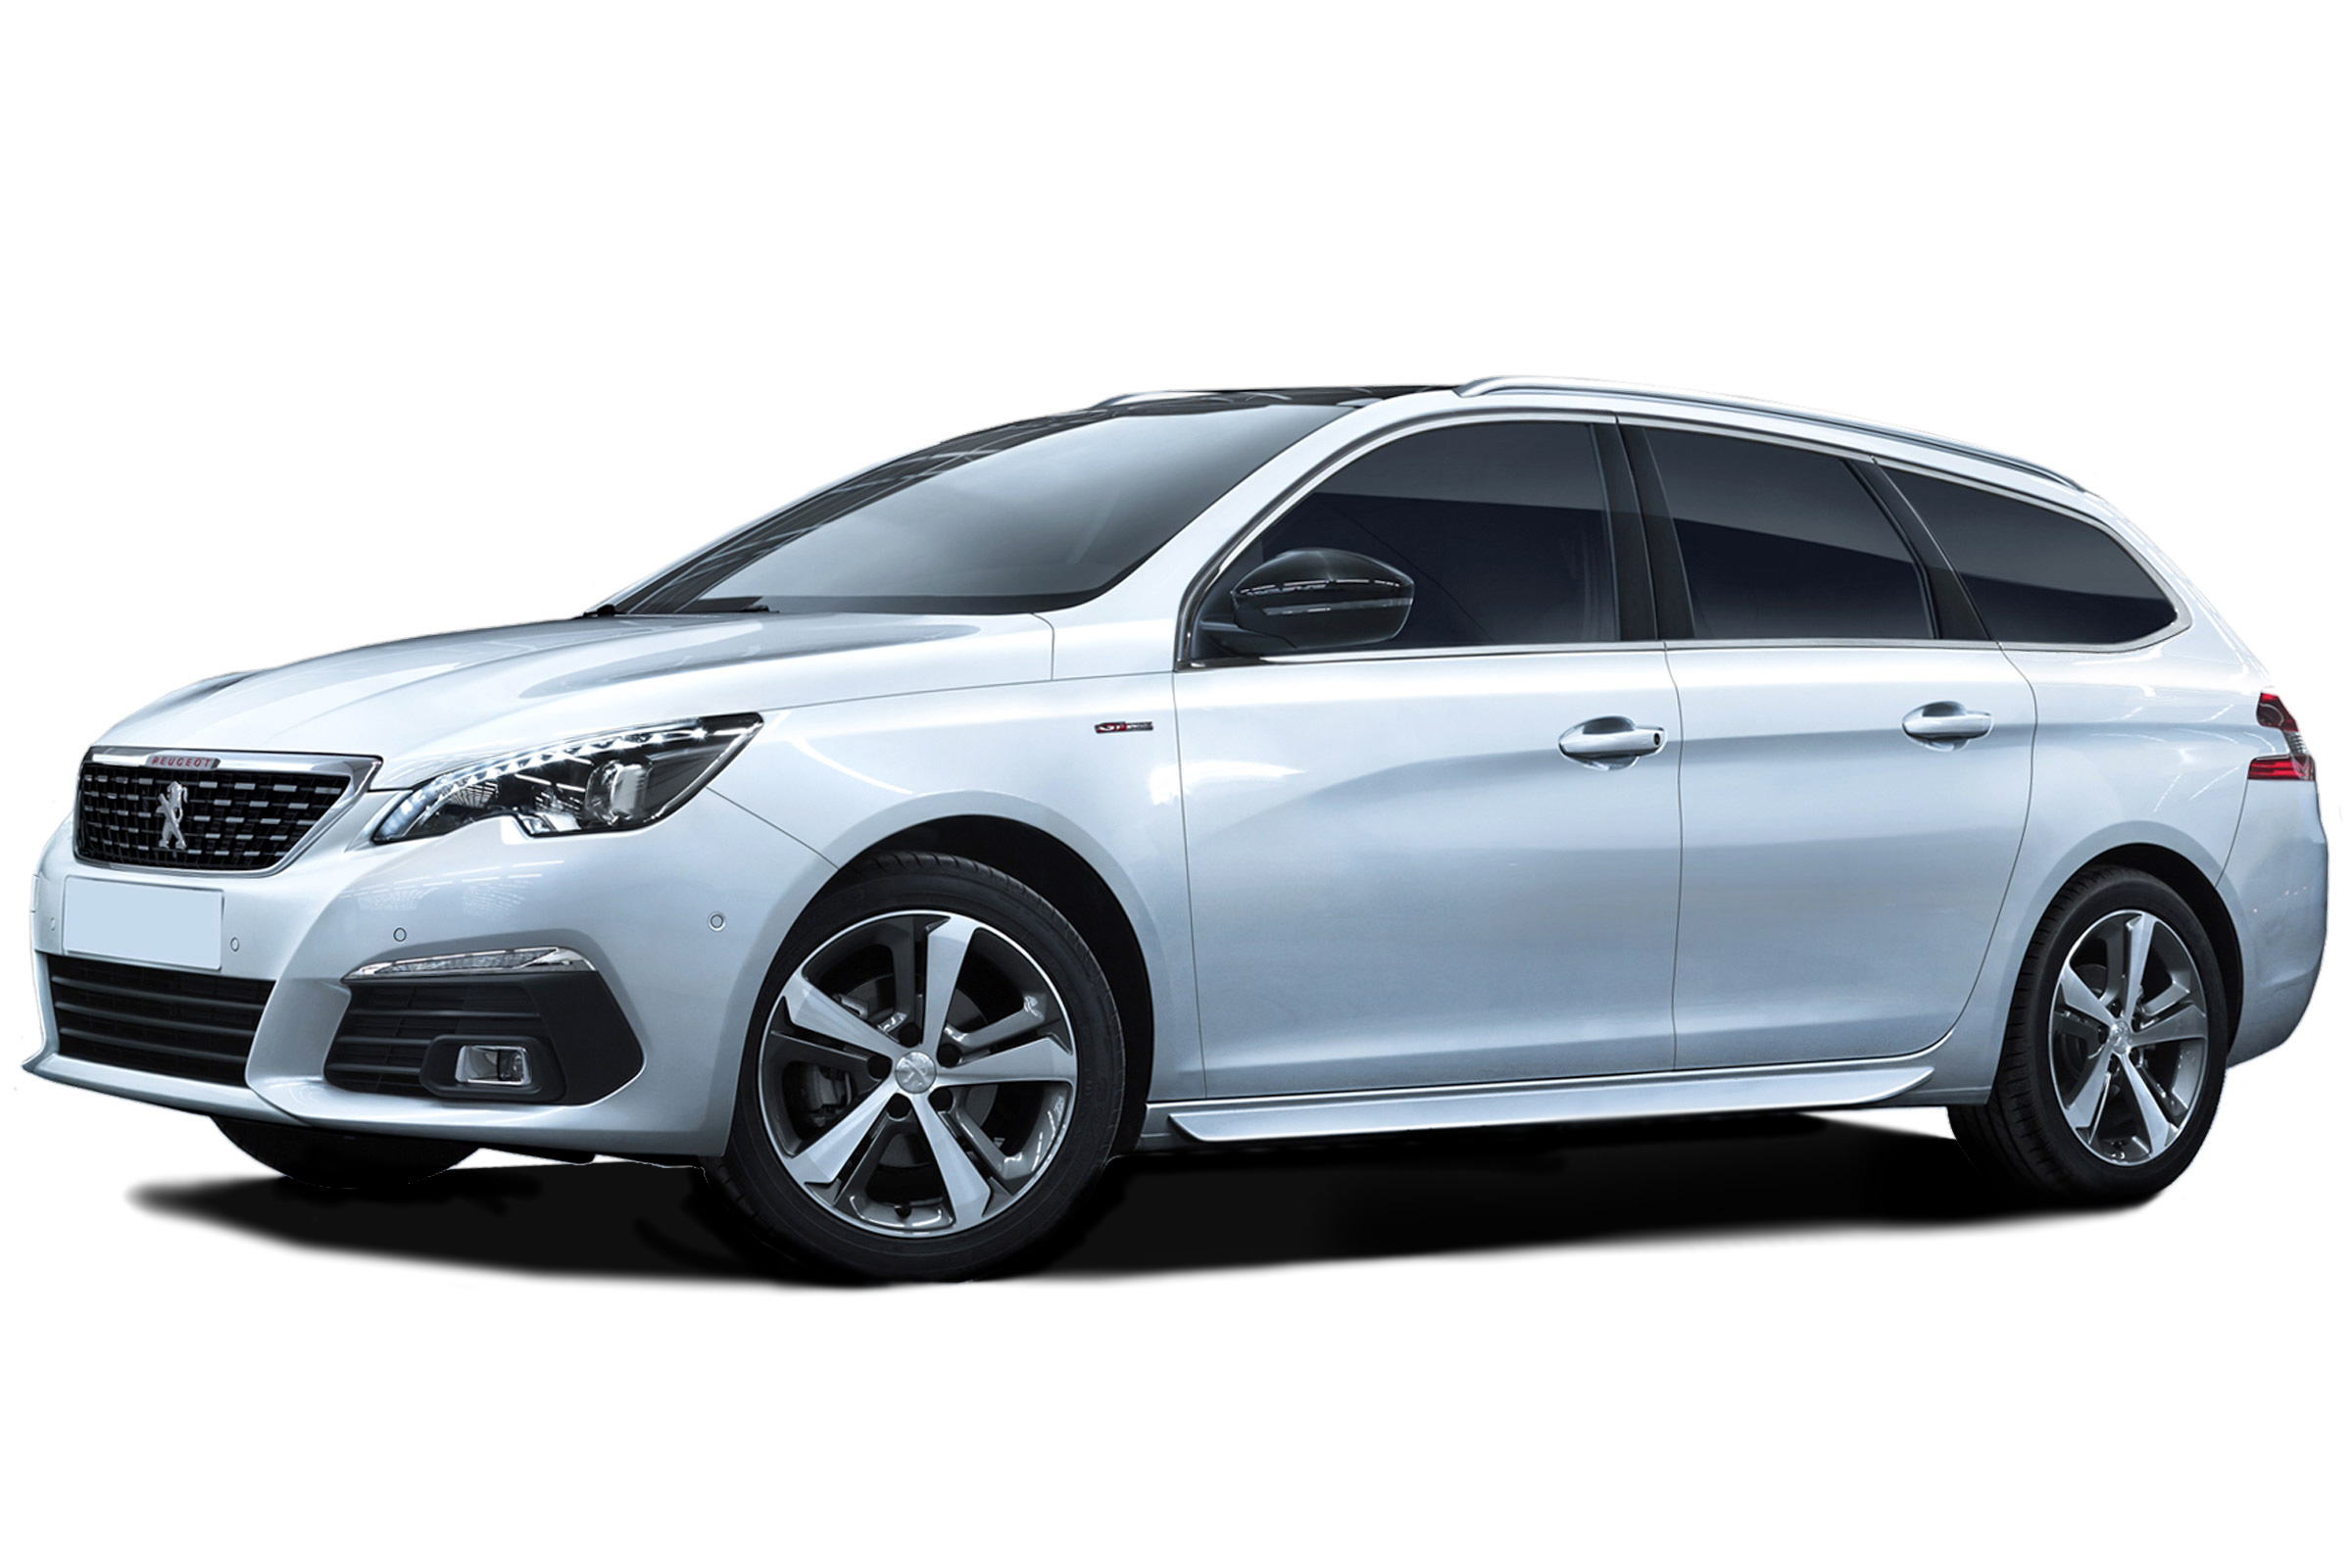 Peugeot 308 Sw Estate Owner Reviews Mpg Problems Reliability Review Carbuyer